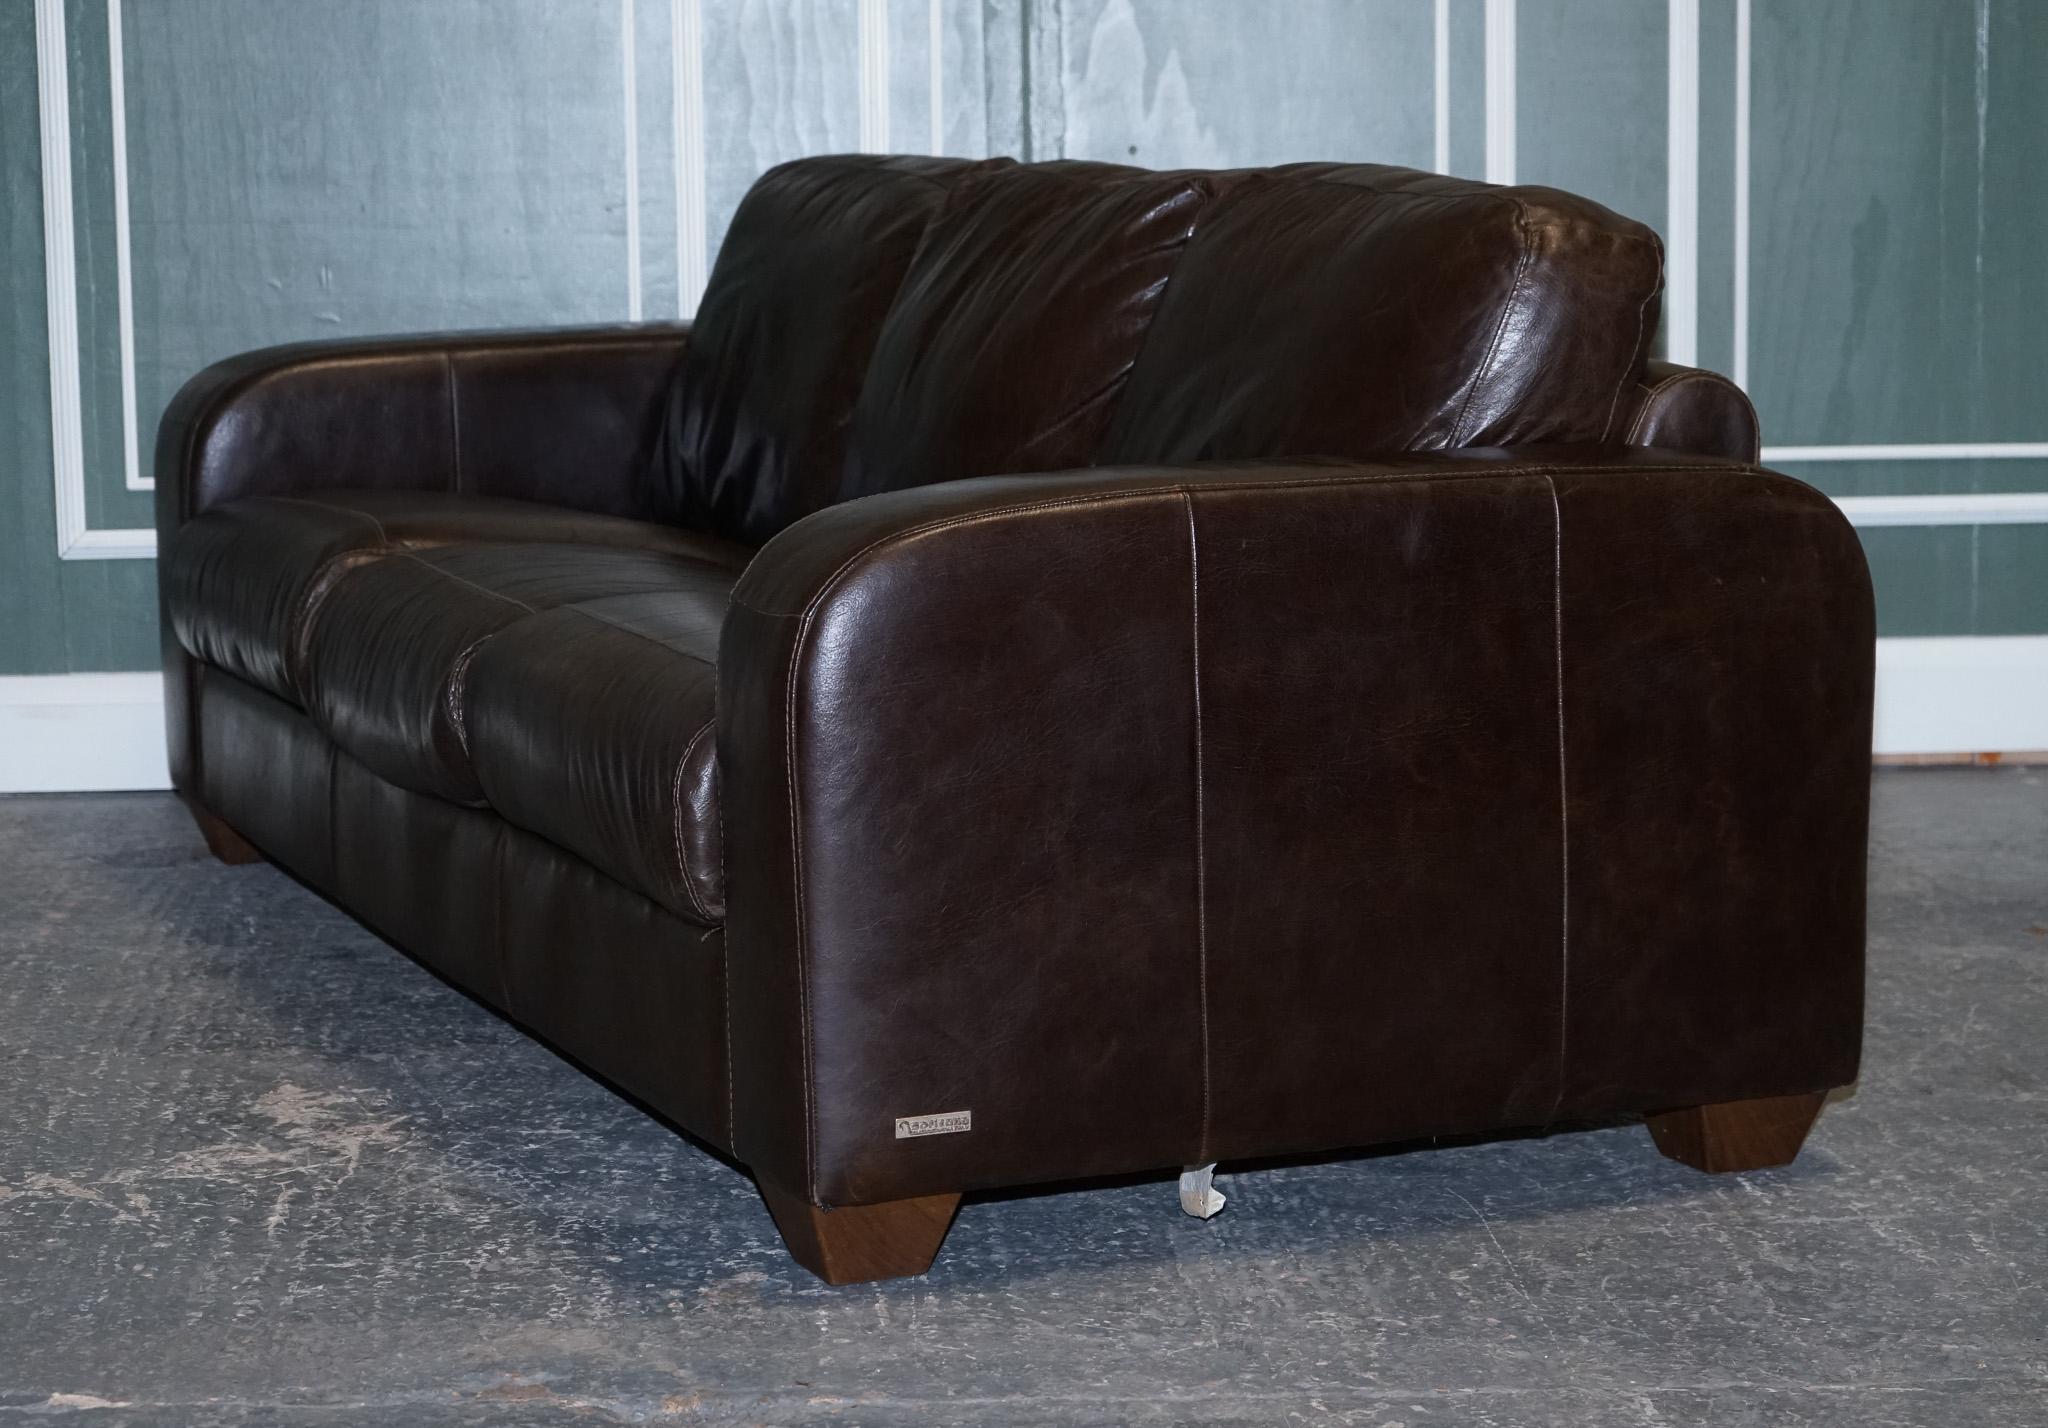 STUNNING VINTAGE CHOCOLATE BROWN LEATHER THREE SEATER SOFA BY SOFITALiA For Sale 6